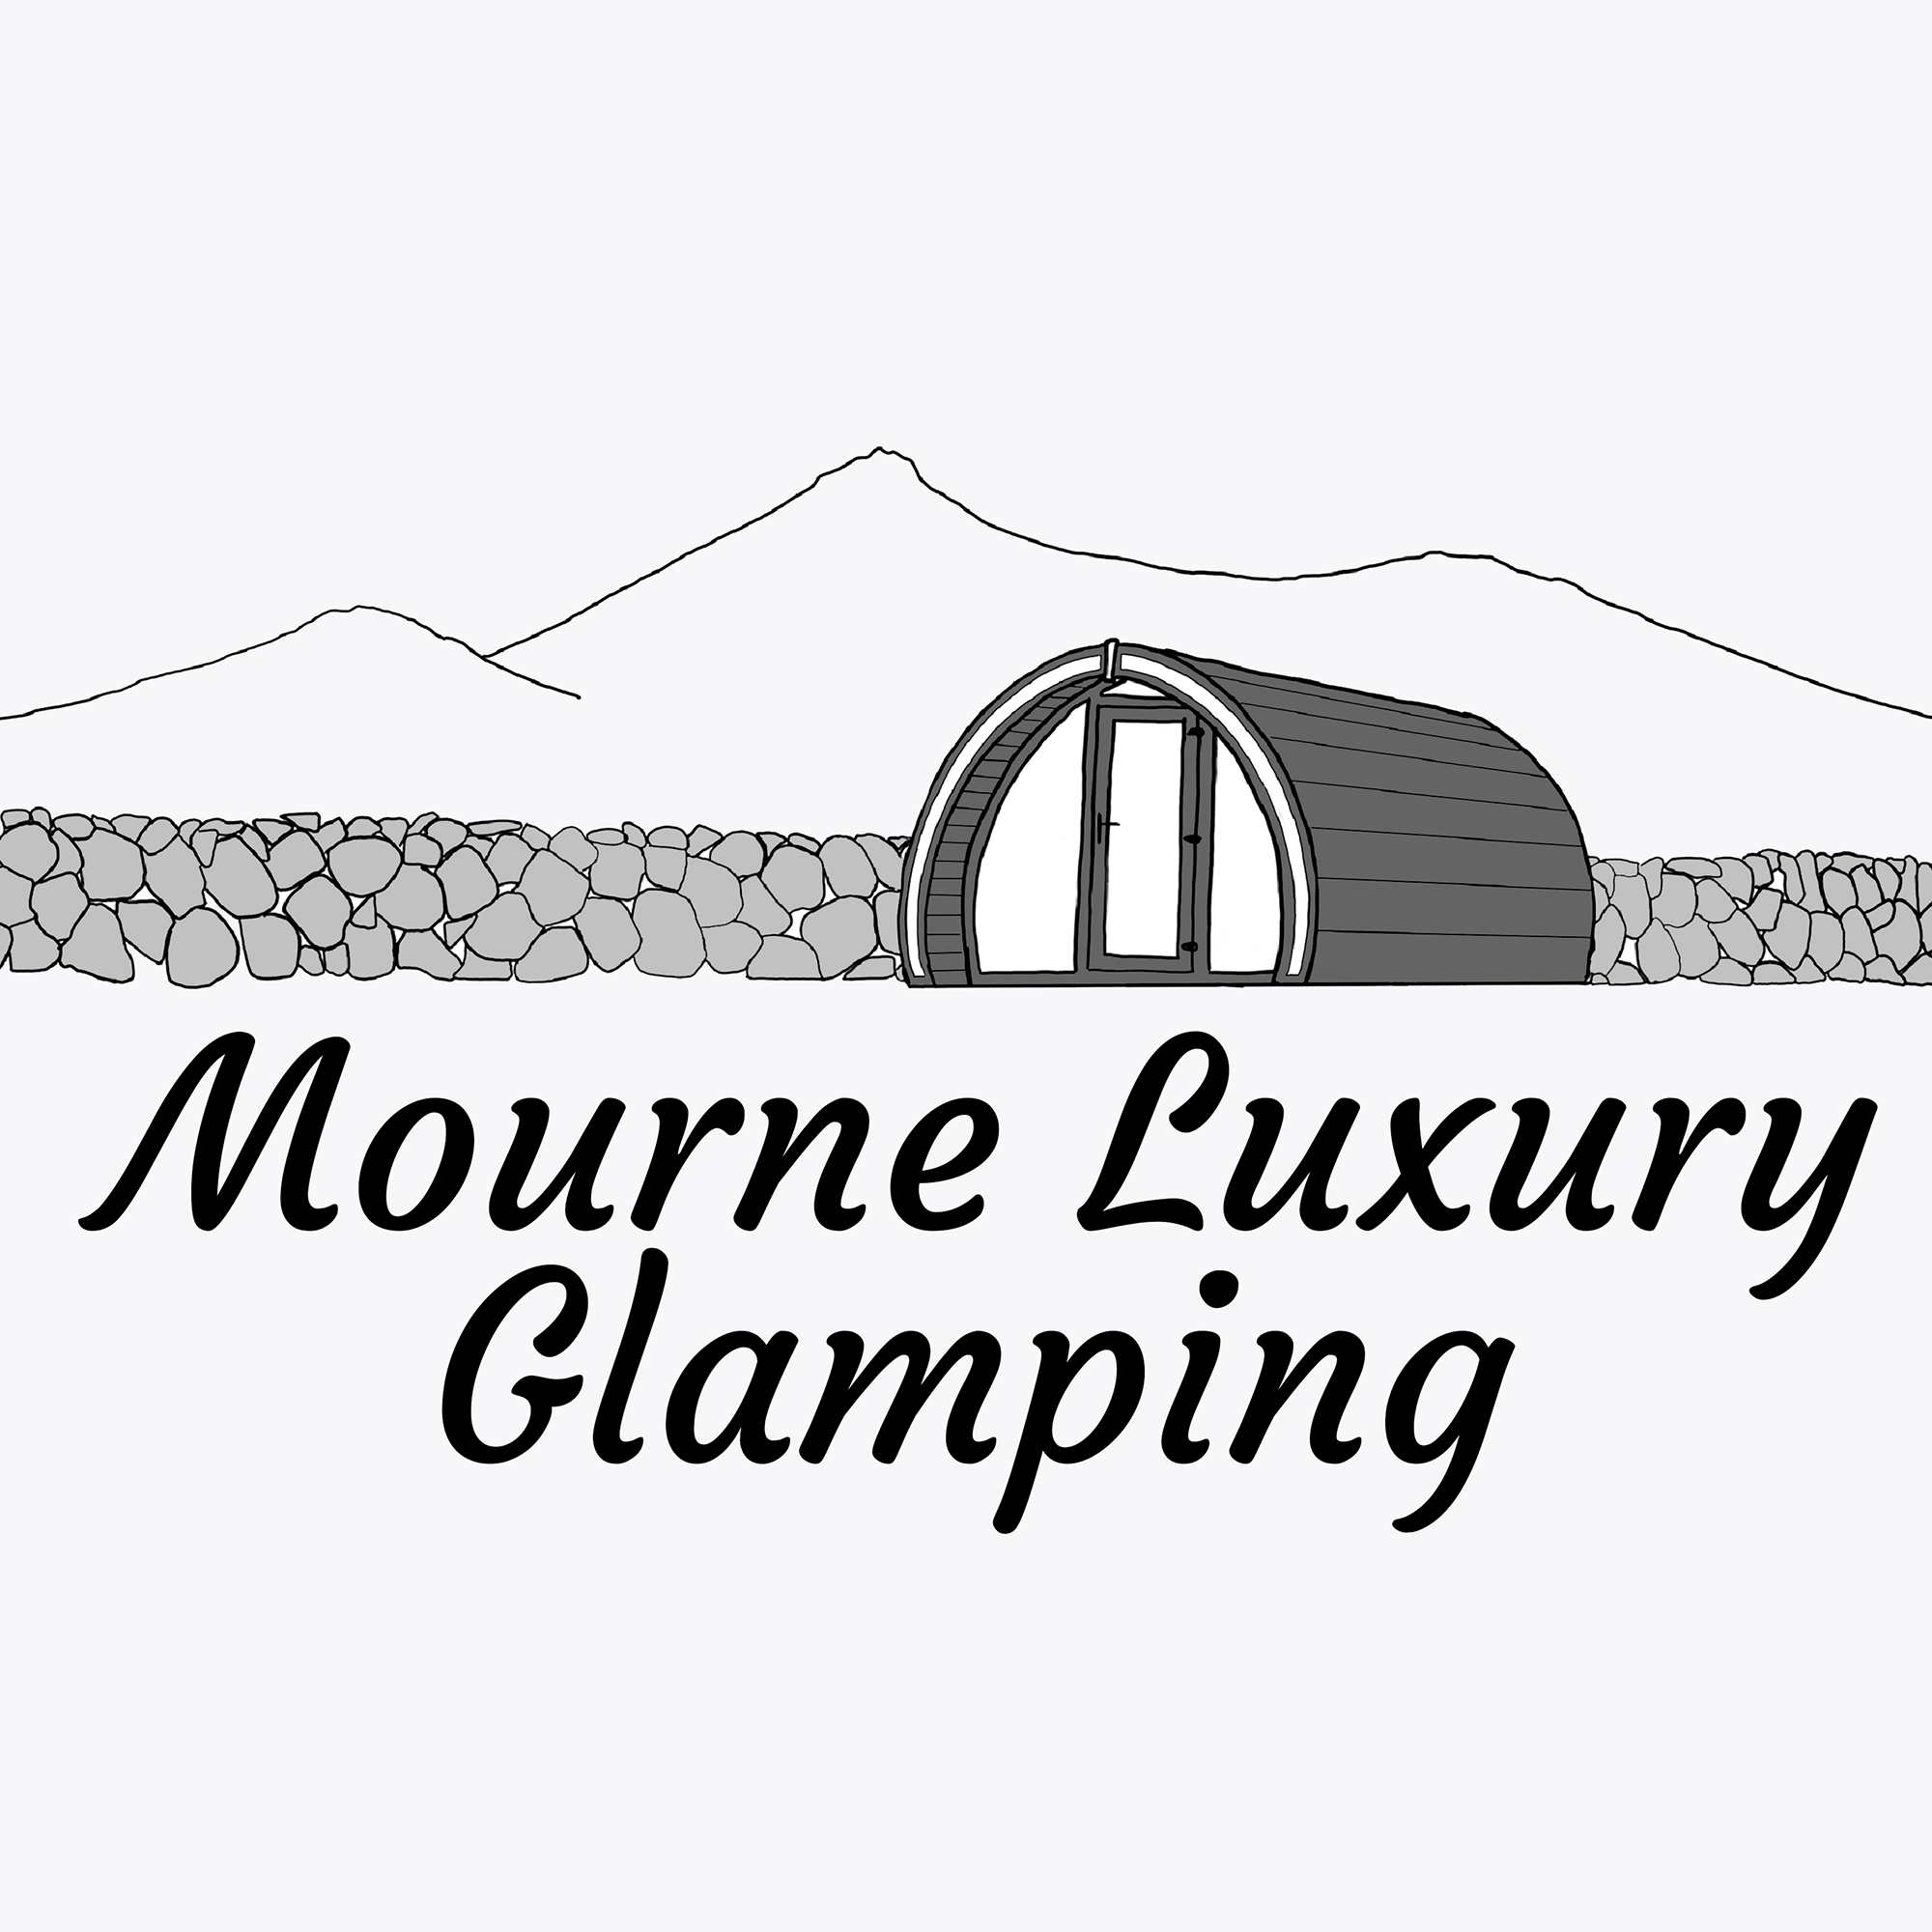 Mourne Luxury Glamping